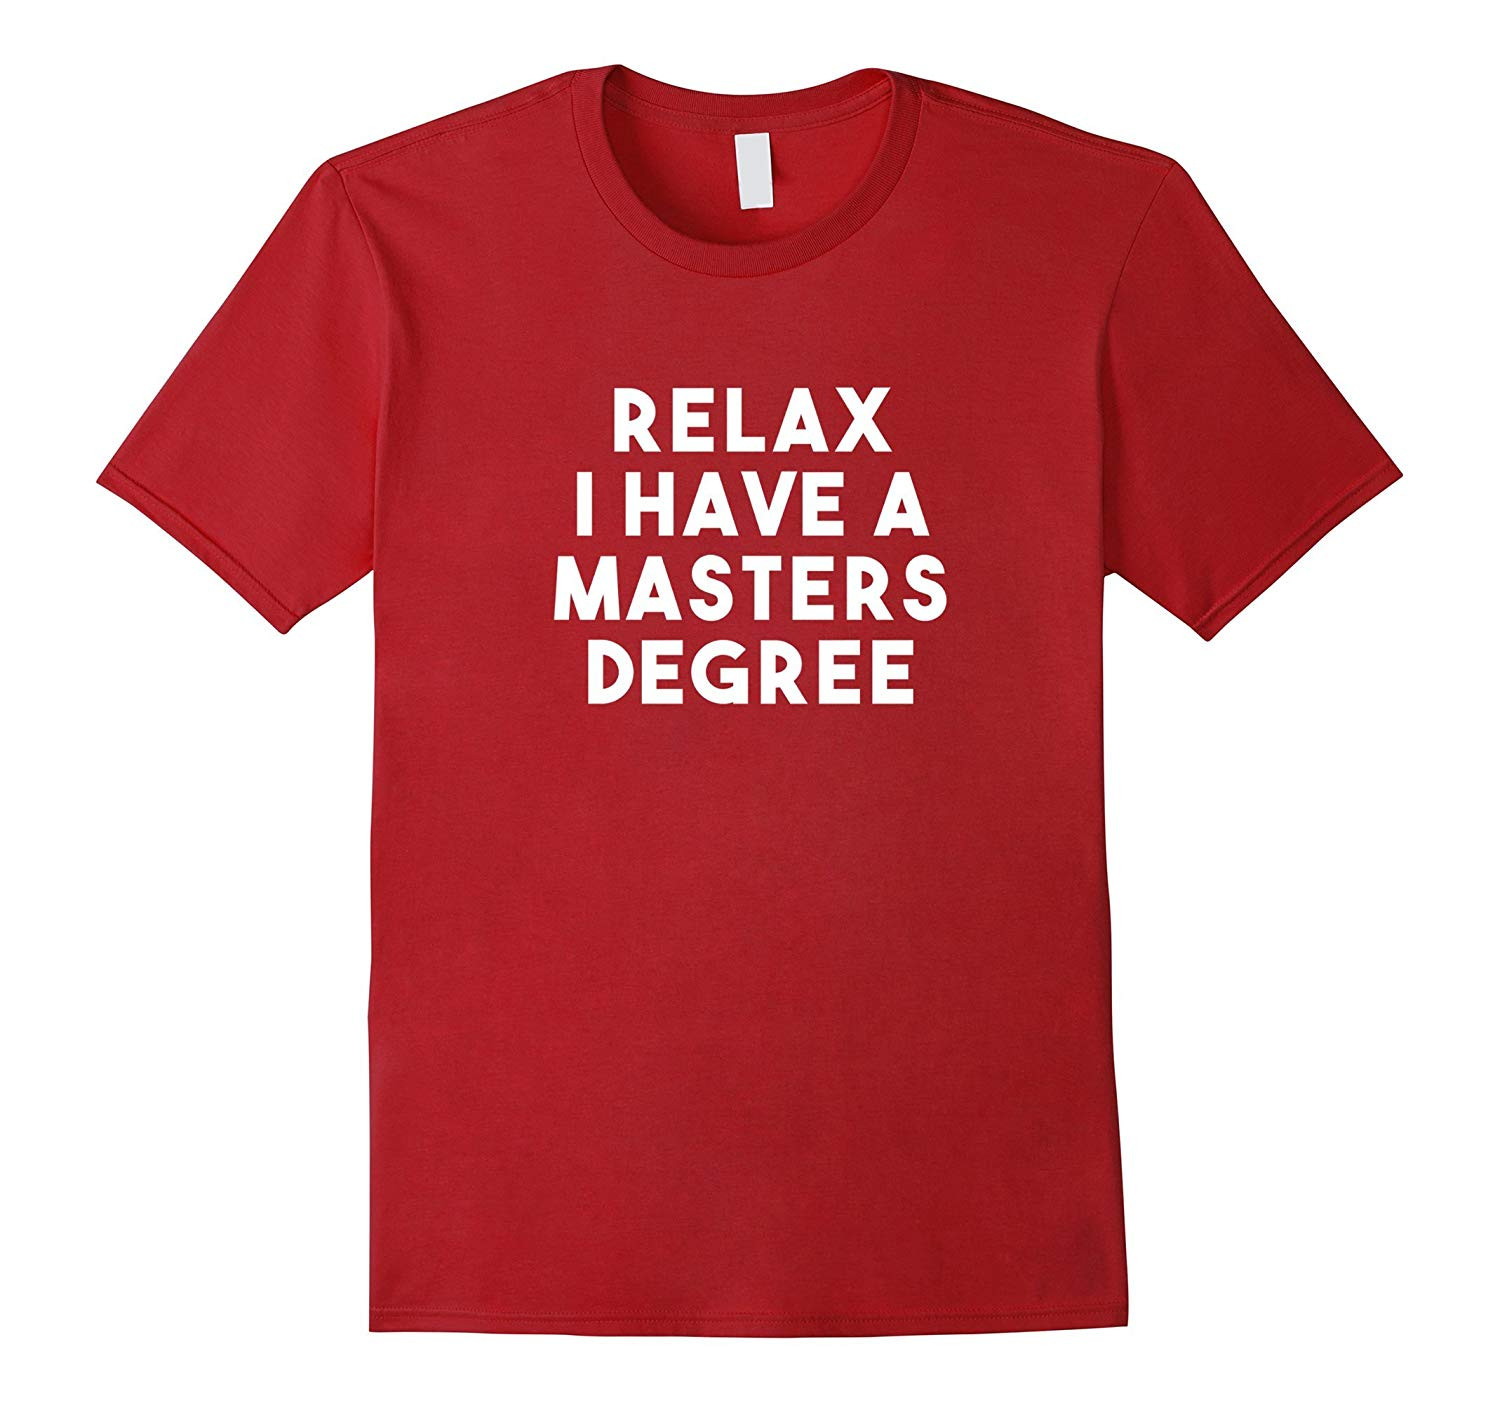 Graduation Gift Ideas For Him Master'S Degree
 Funny Grad School Graduation Gift for him her Masters